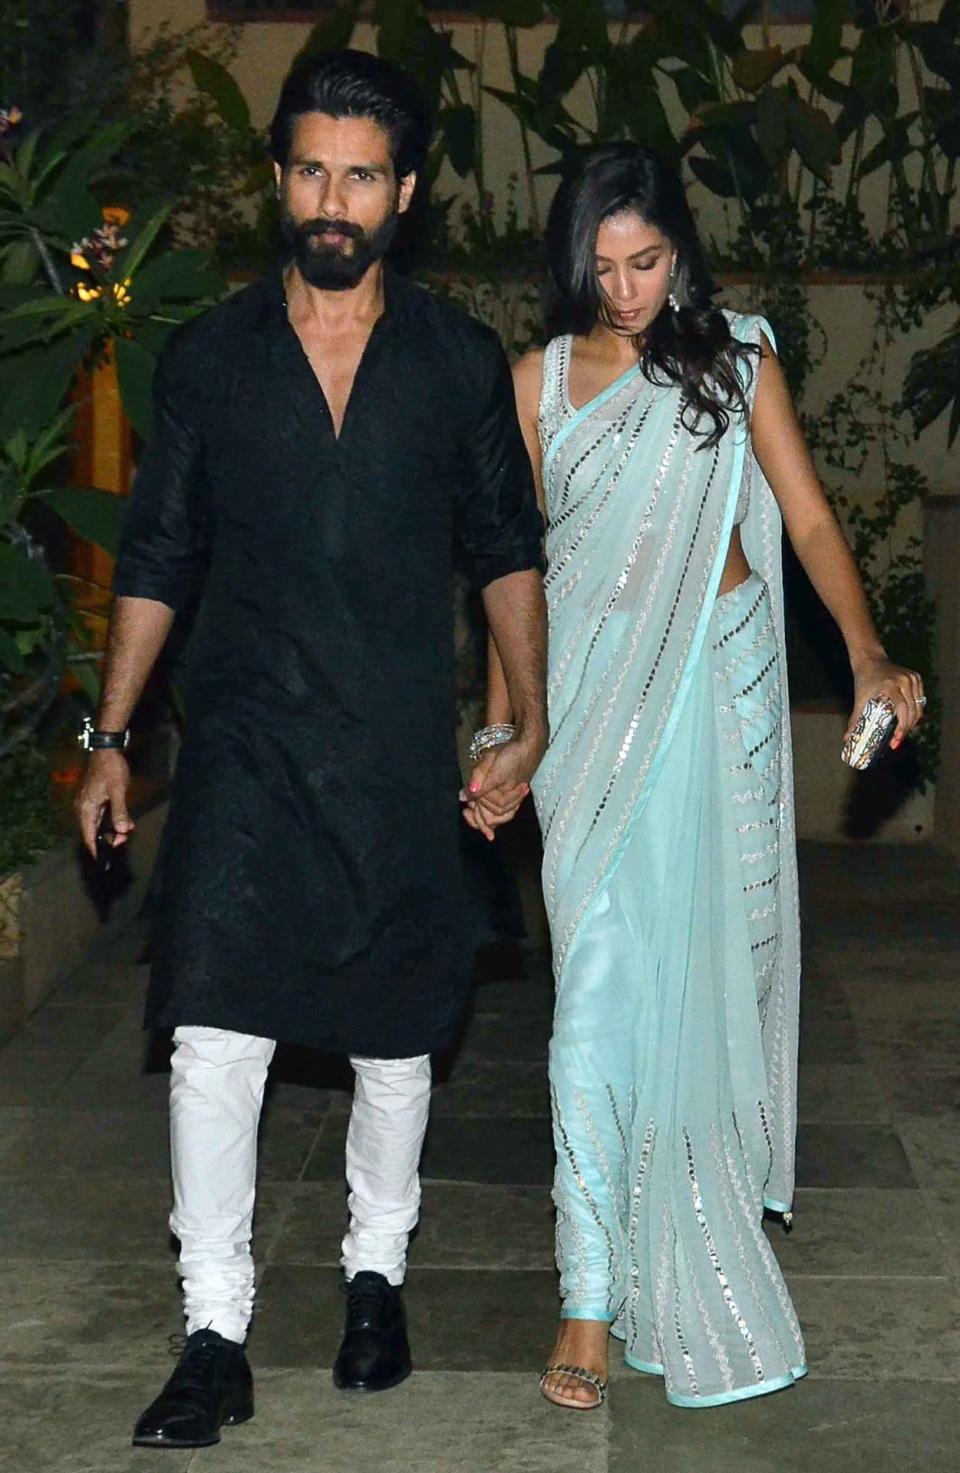 Shahid and Mira Kapoor look an adorable couple indeed. And yes, Mira’s sari is blue.